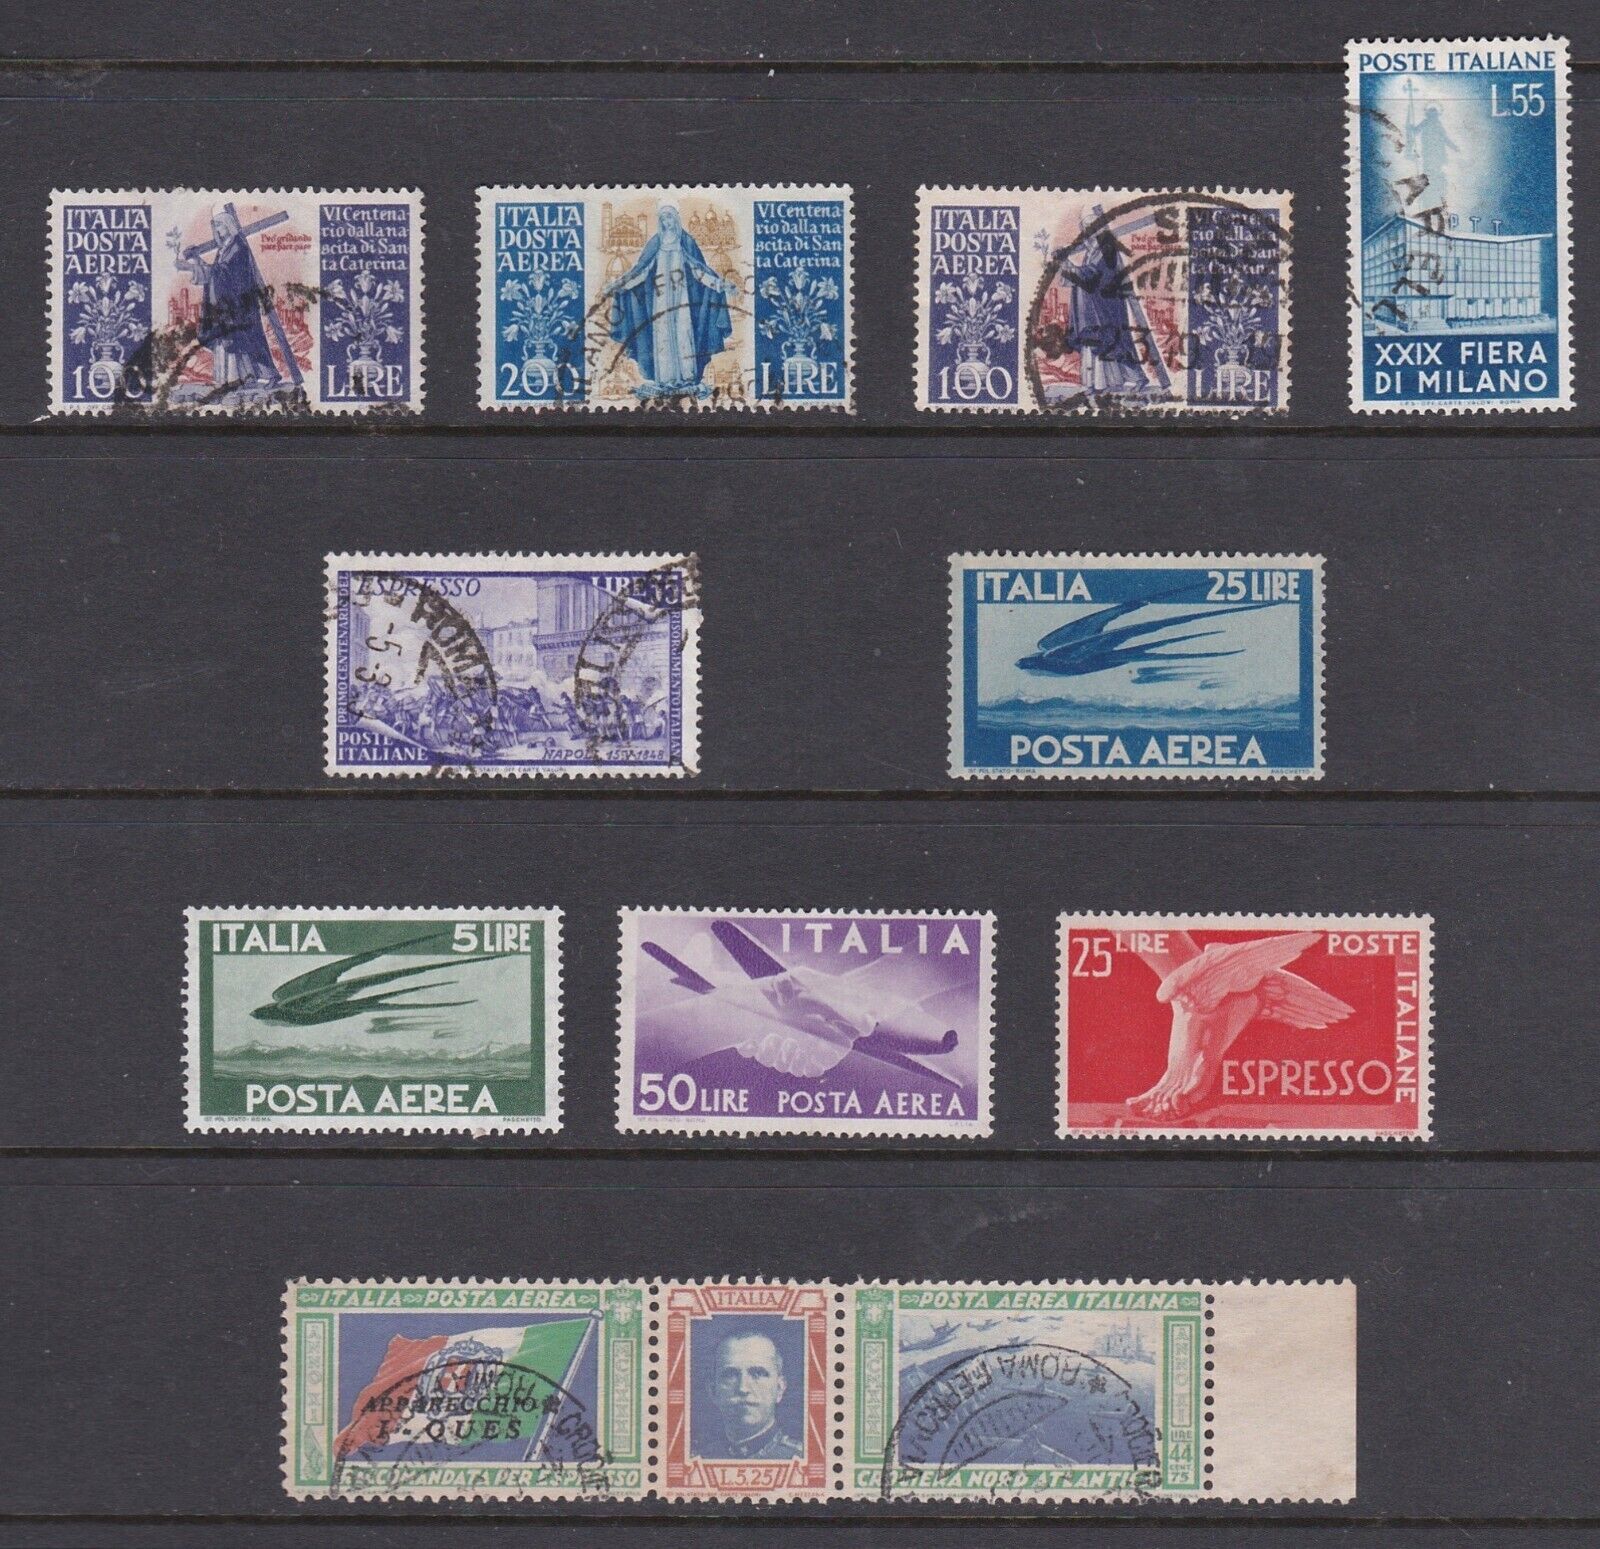 ITALY 19331959 Very good Air Mail stamps Used and MNH Very Fine Condition